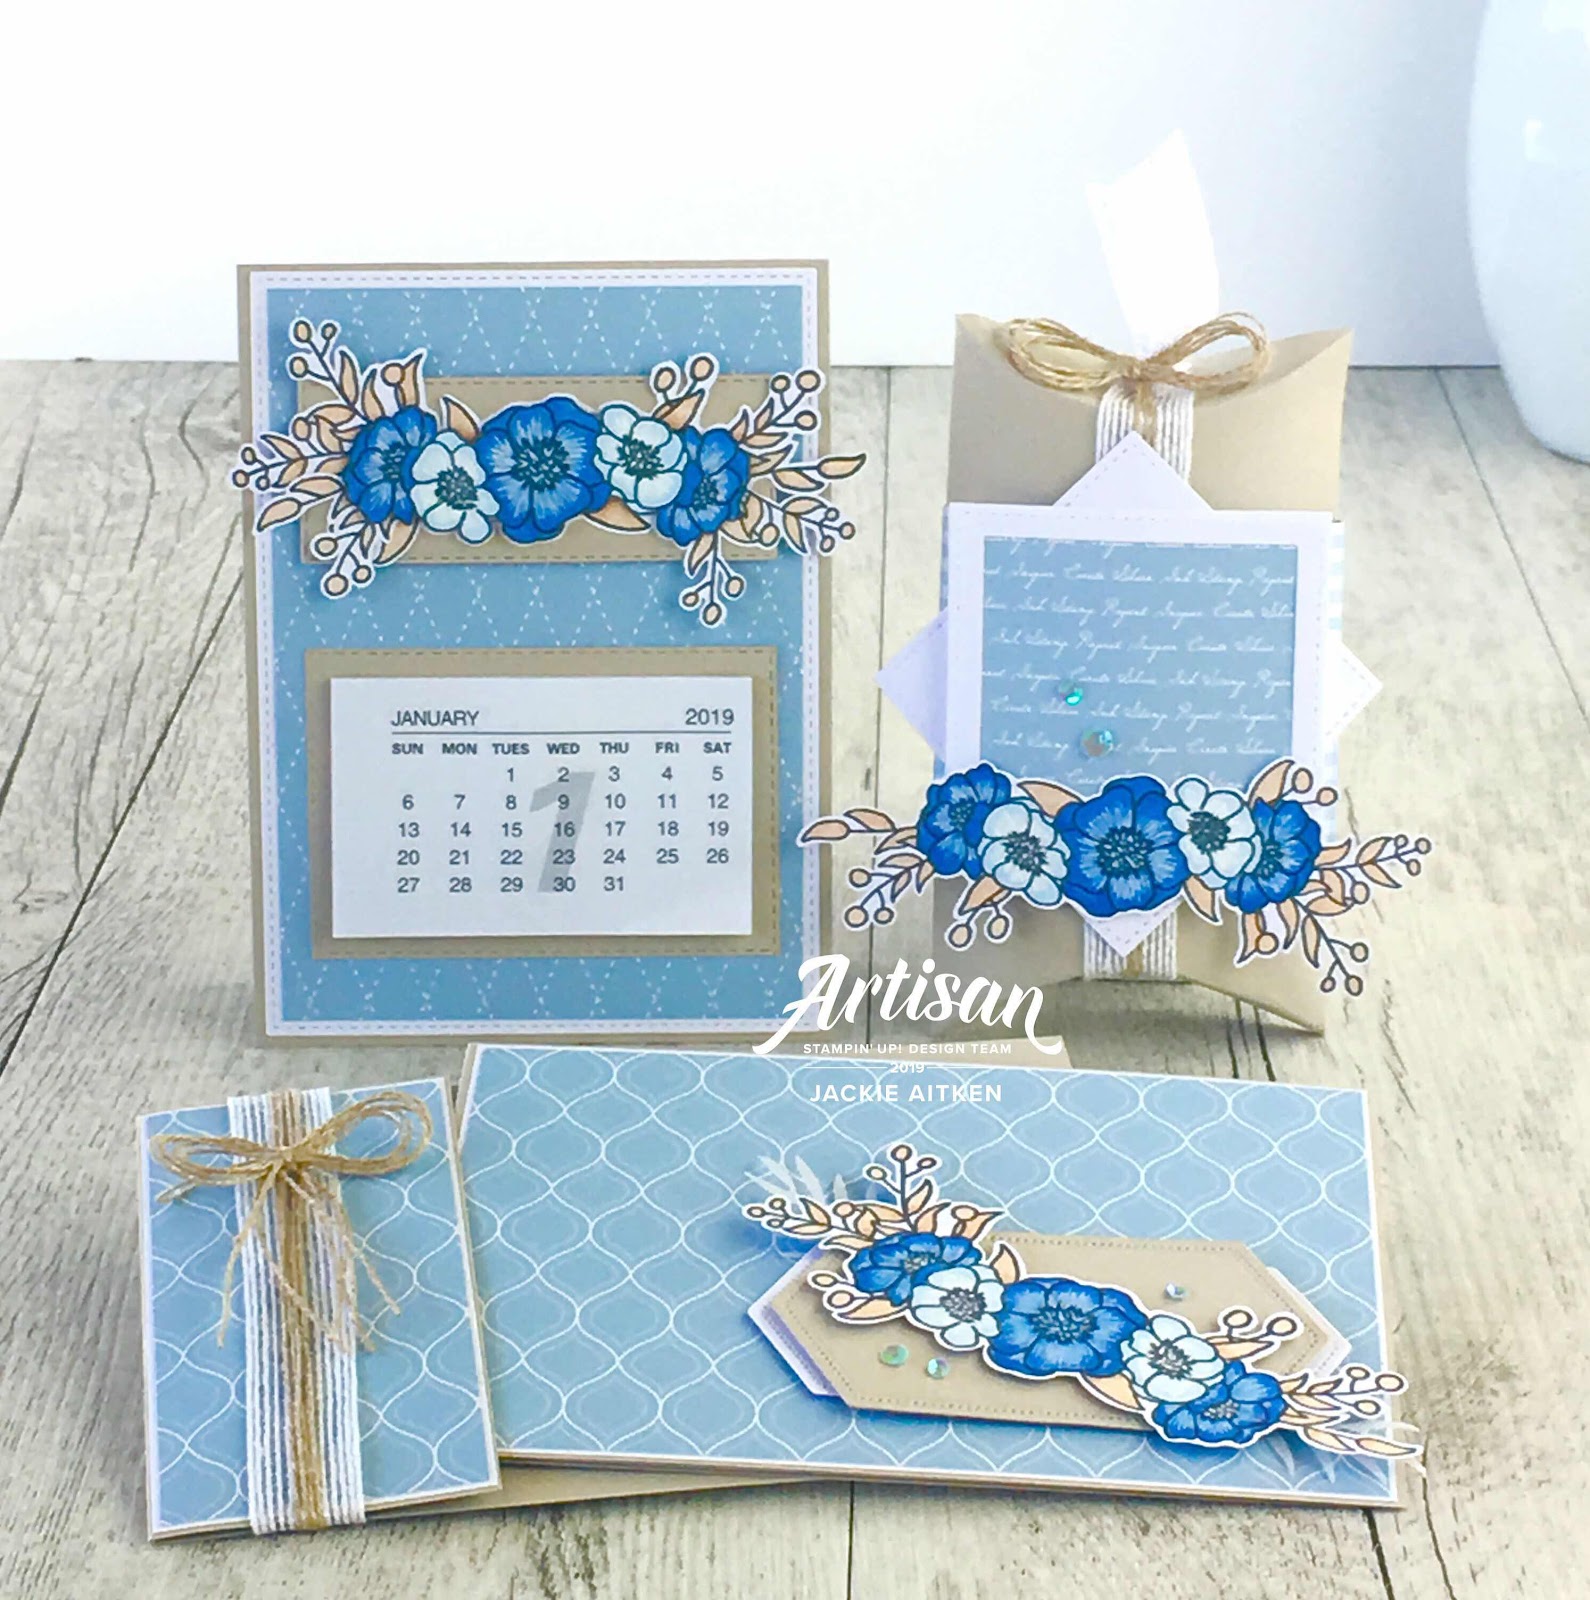 Jaxx Crafty Creations, Stampin' Up! Artisan, Bloom & Grow, Floral Card, Gift Packaging, Mini Calendar, Pillow Box, Seaside Spray, 2019-2021 In Colours,  Happy Mail, Be Inspired Blog Hop